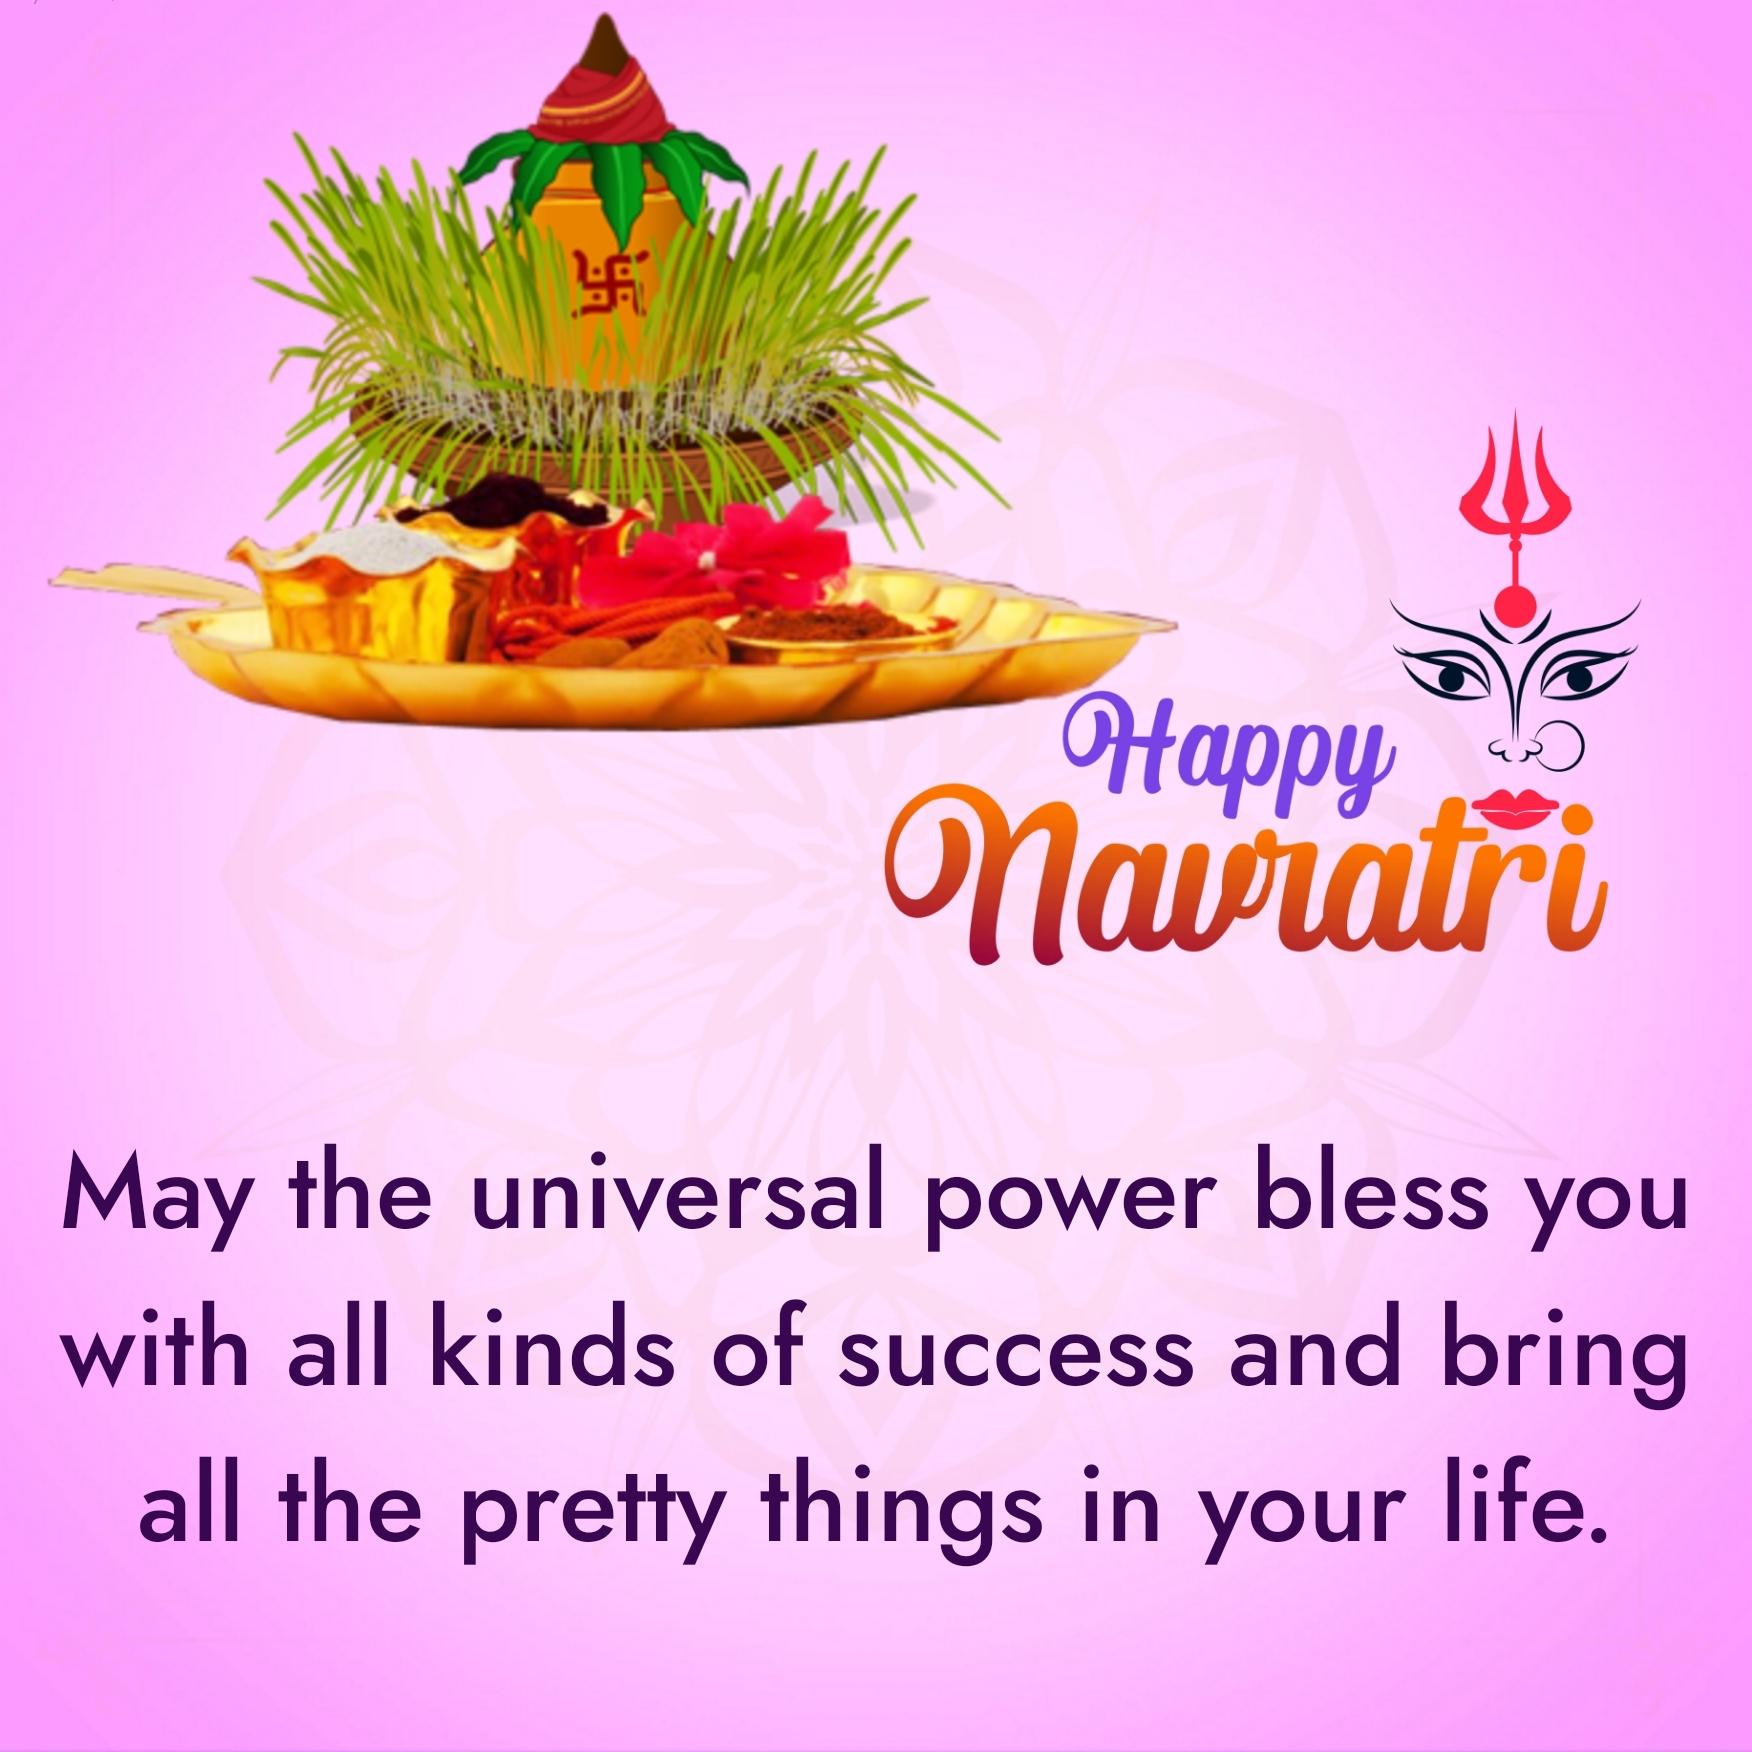 May the universal power bless you with all kinds of success